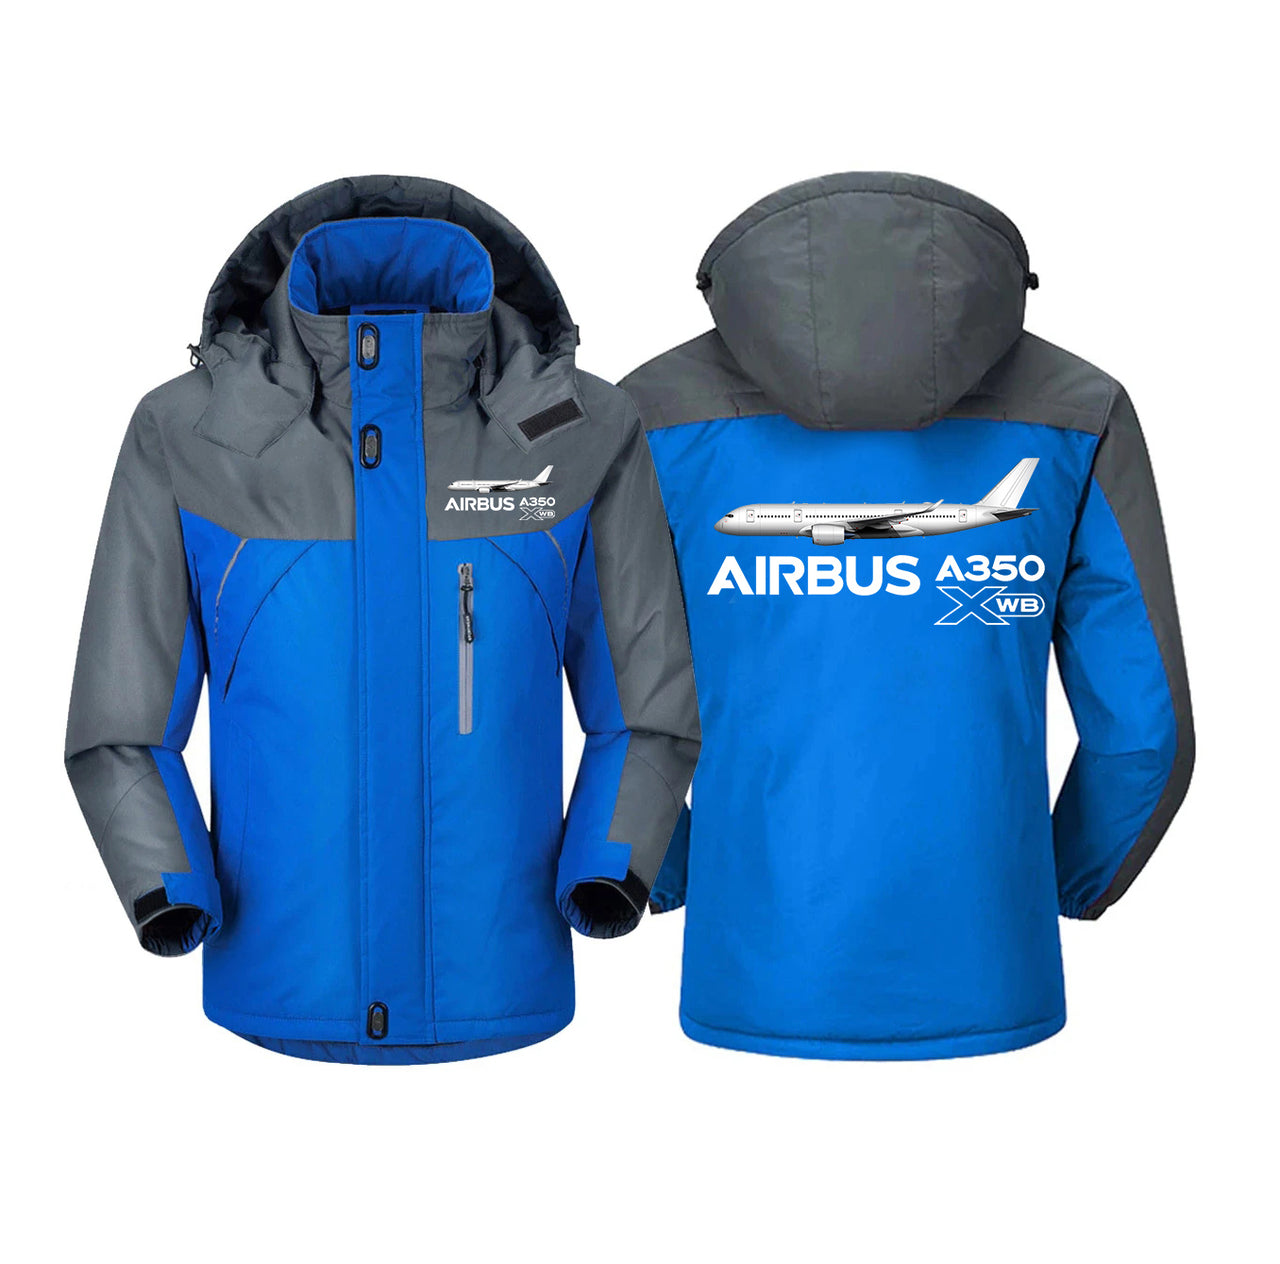 The Airbus A350 WXB Designed Thick Winter Jackets